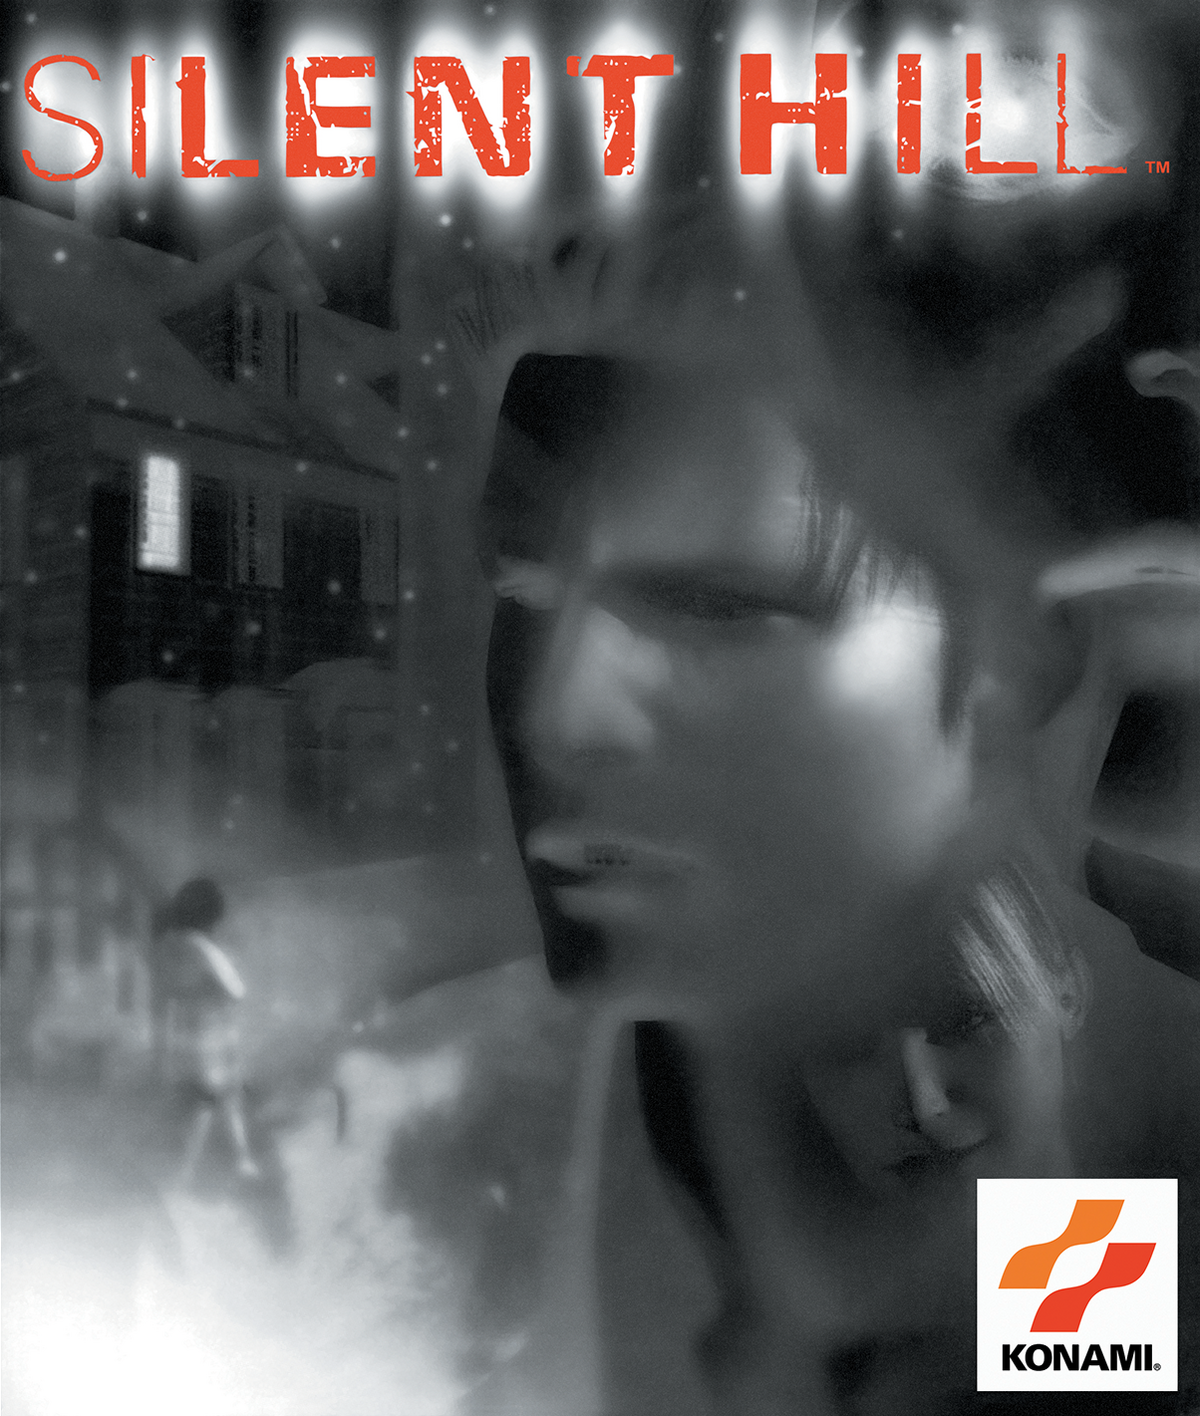 Silent Hill finally returns in a reveal this week - Polygon